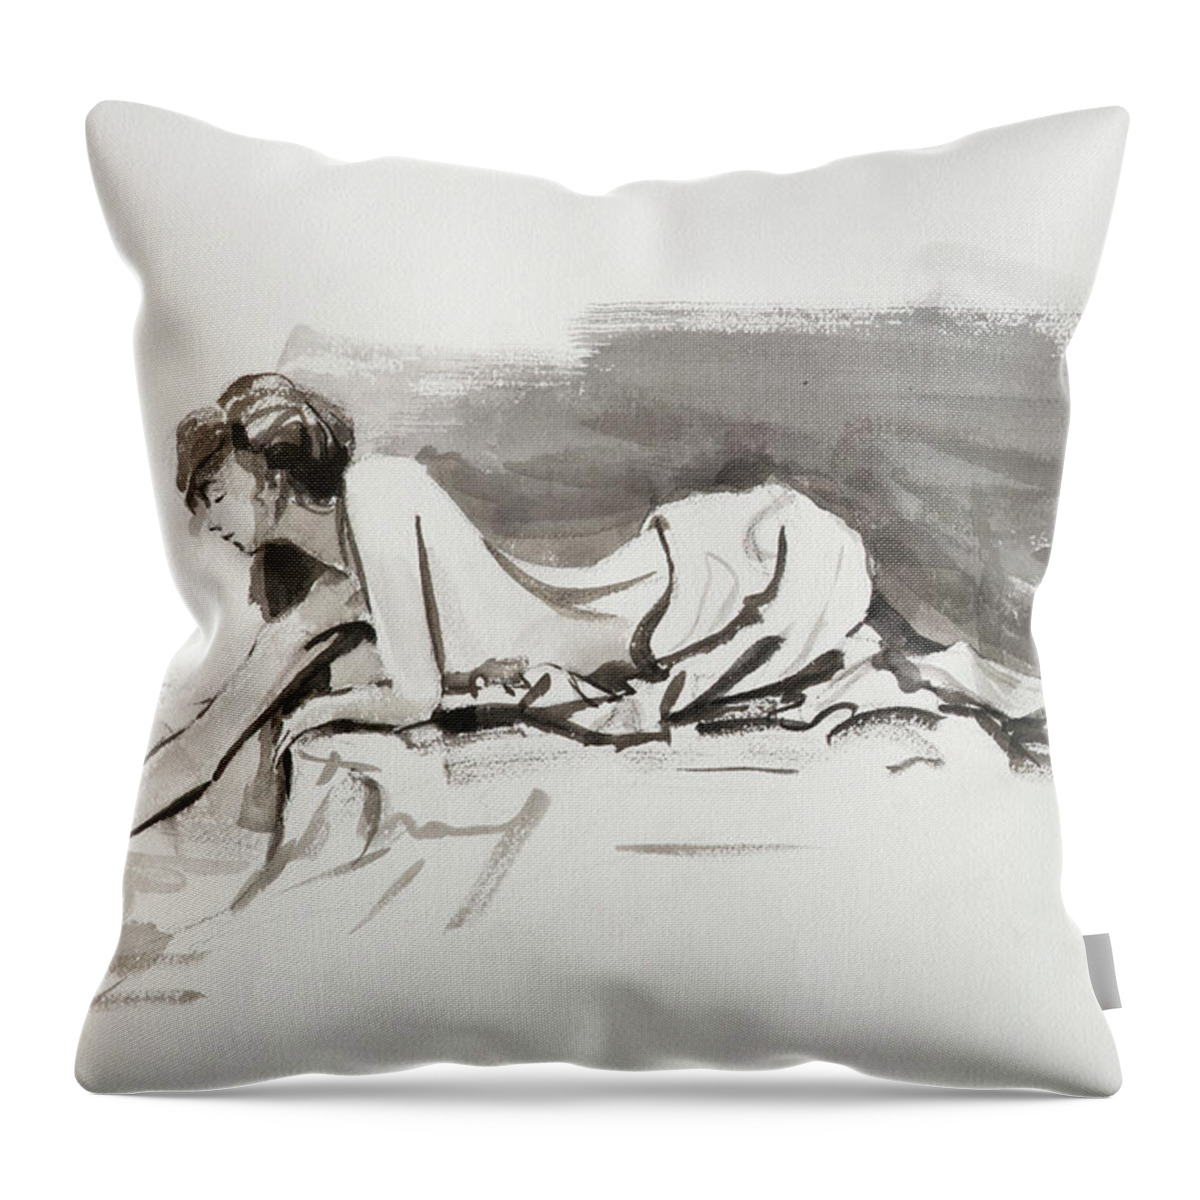 Woman Throw Pillow featuring the painting Introspection by Steve Henderson